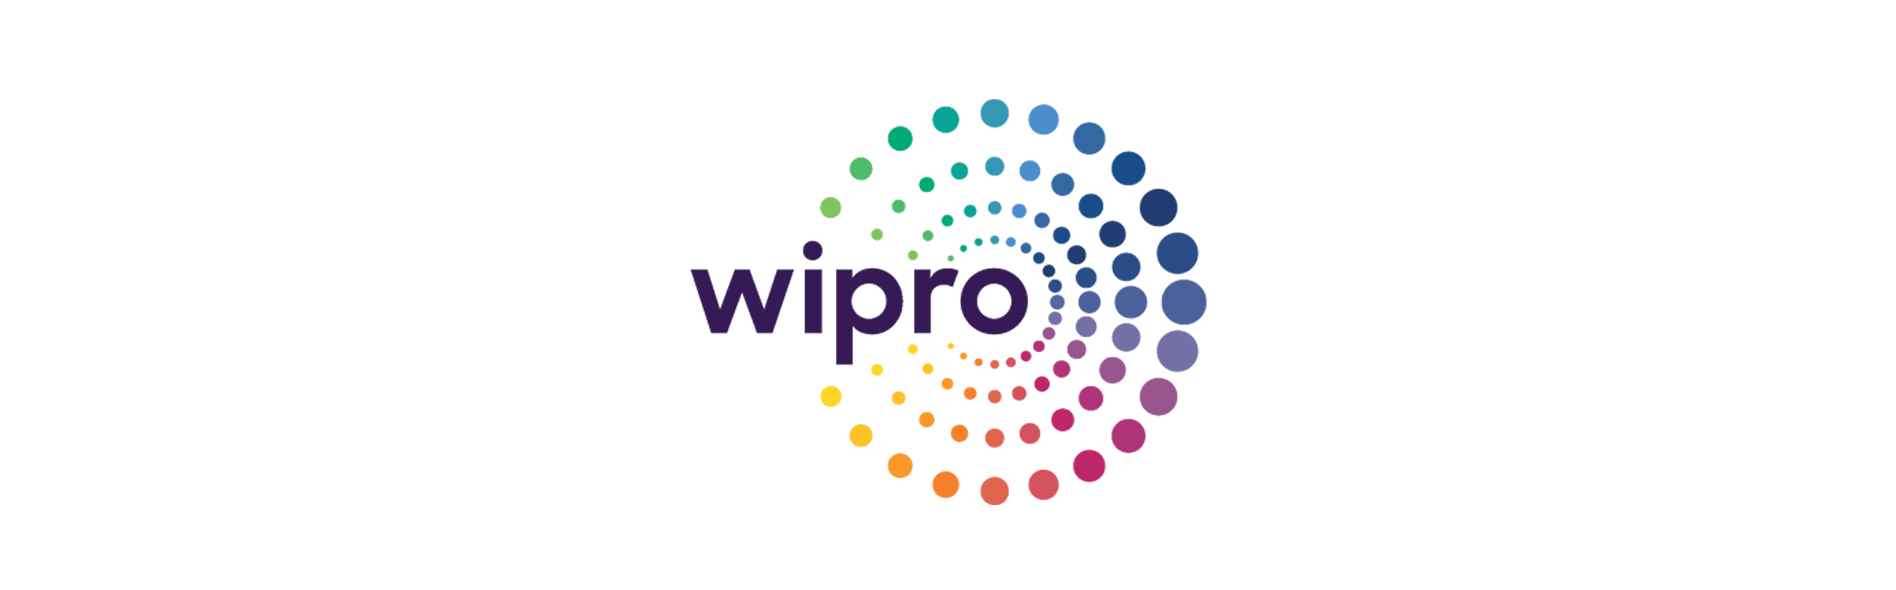 Seamless Integration Solution | ReconX - Wipro